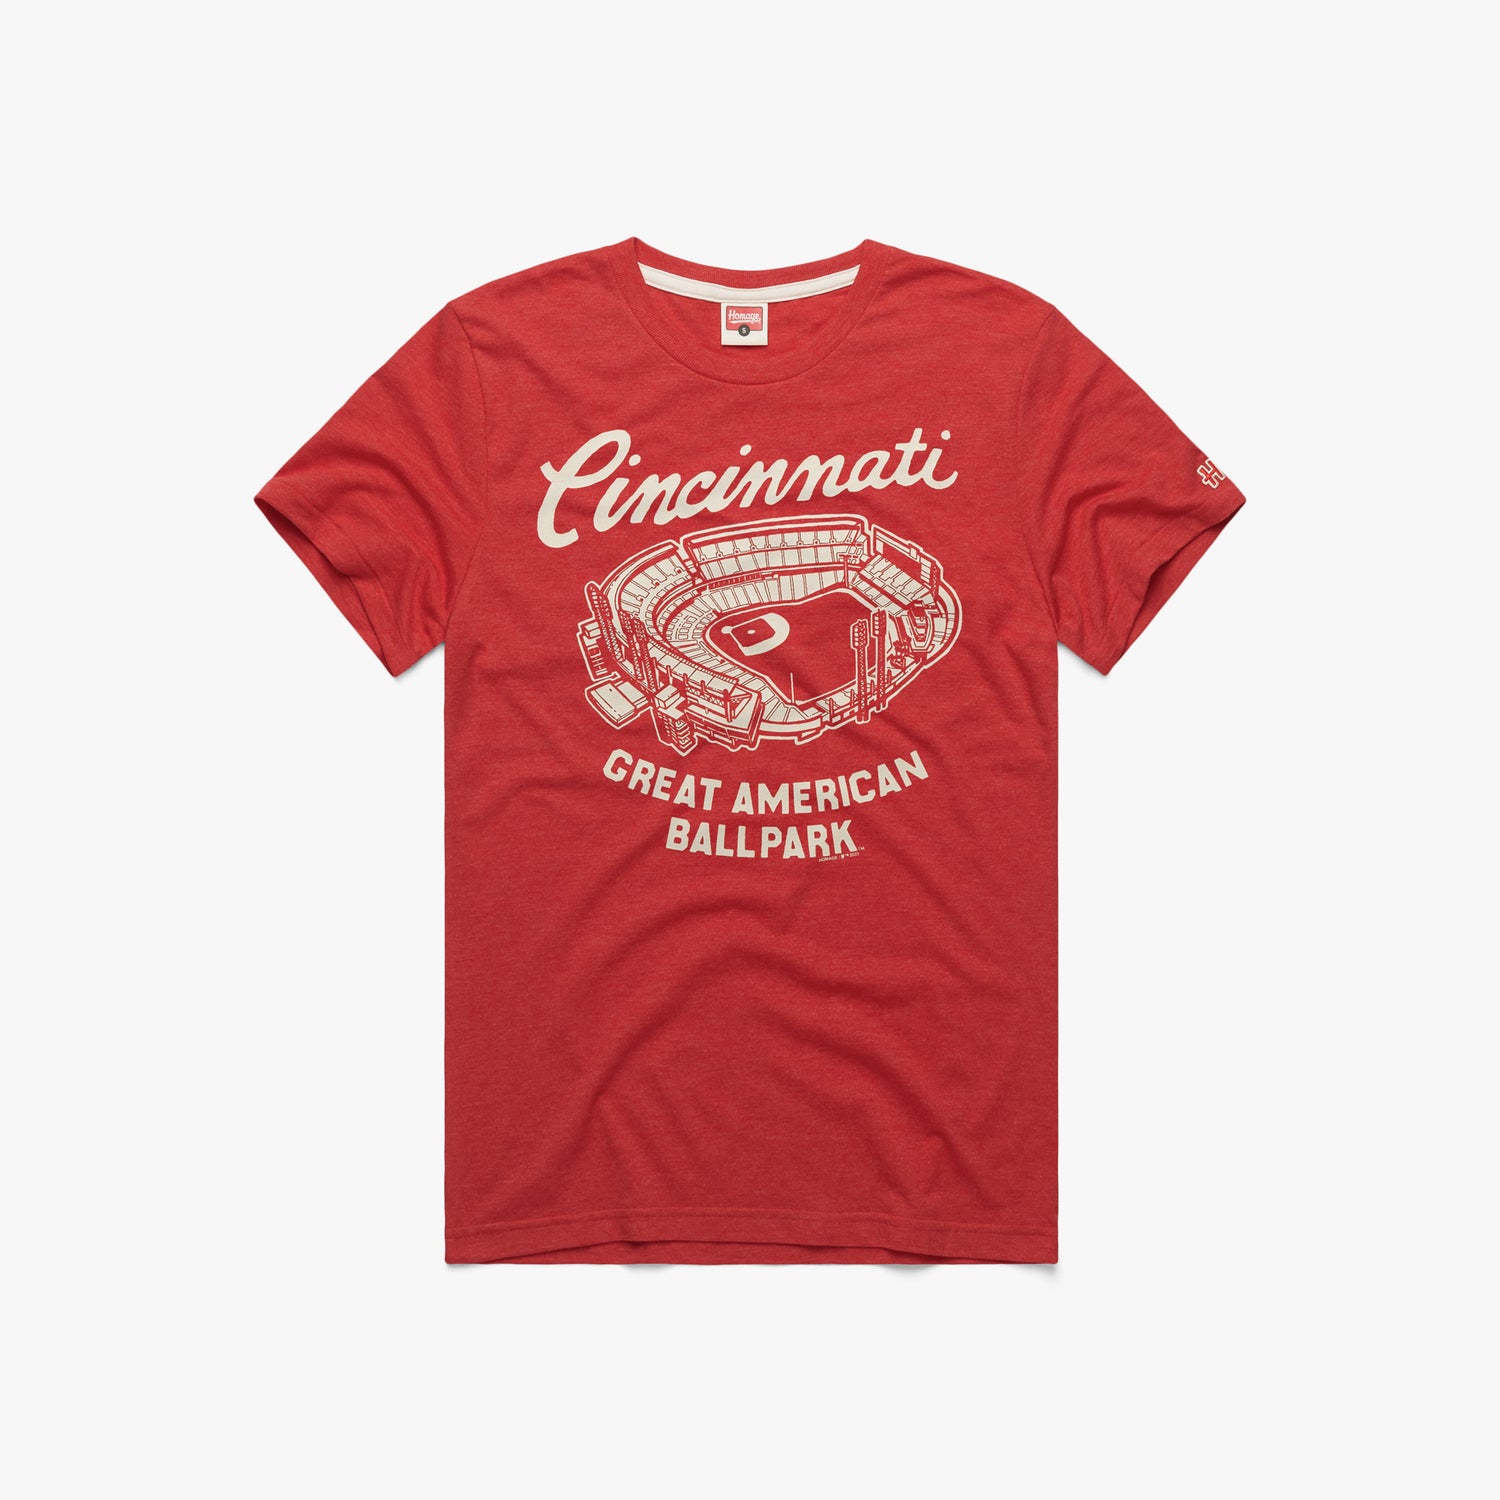 Official Vintage Reds Clothing, Throwback Cincinnati Reds Gear, Reds Vintage  Collection